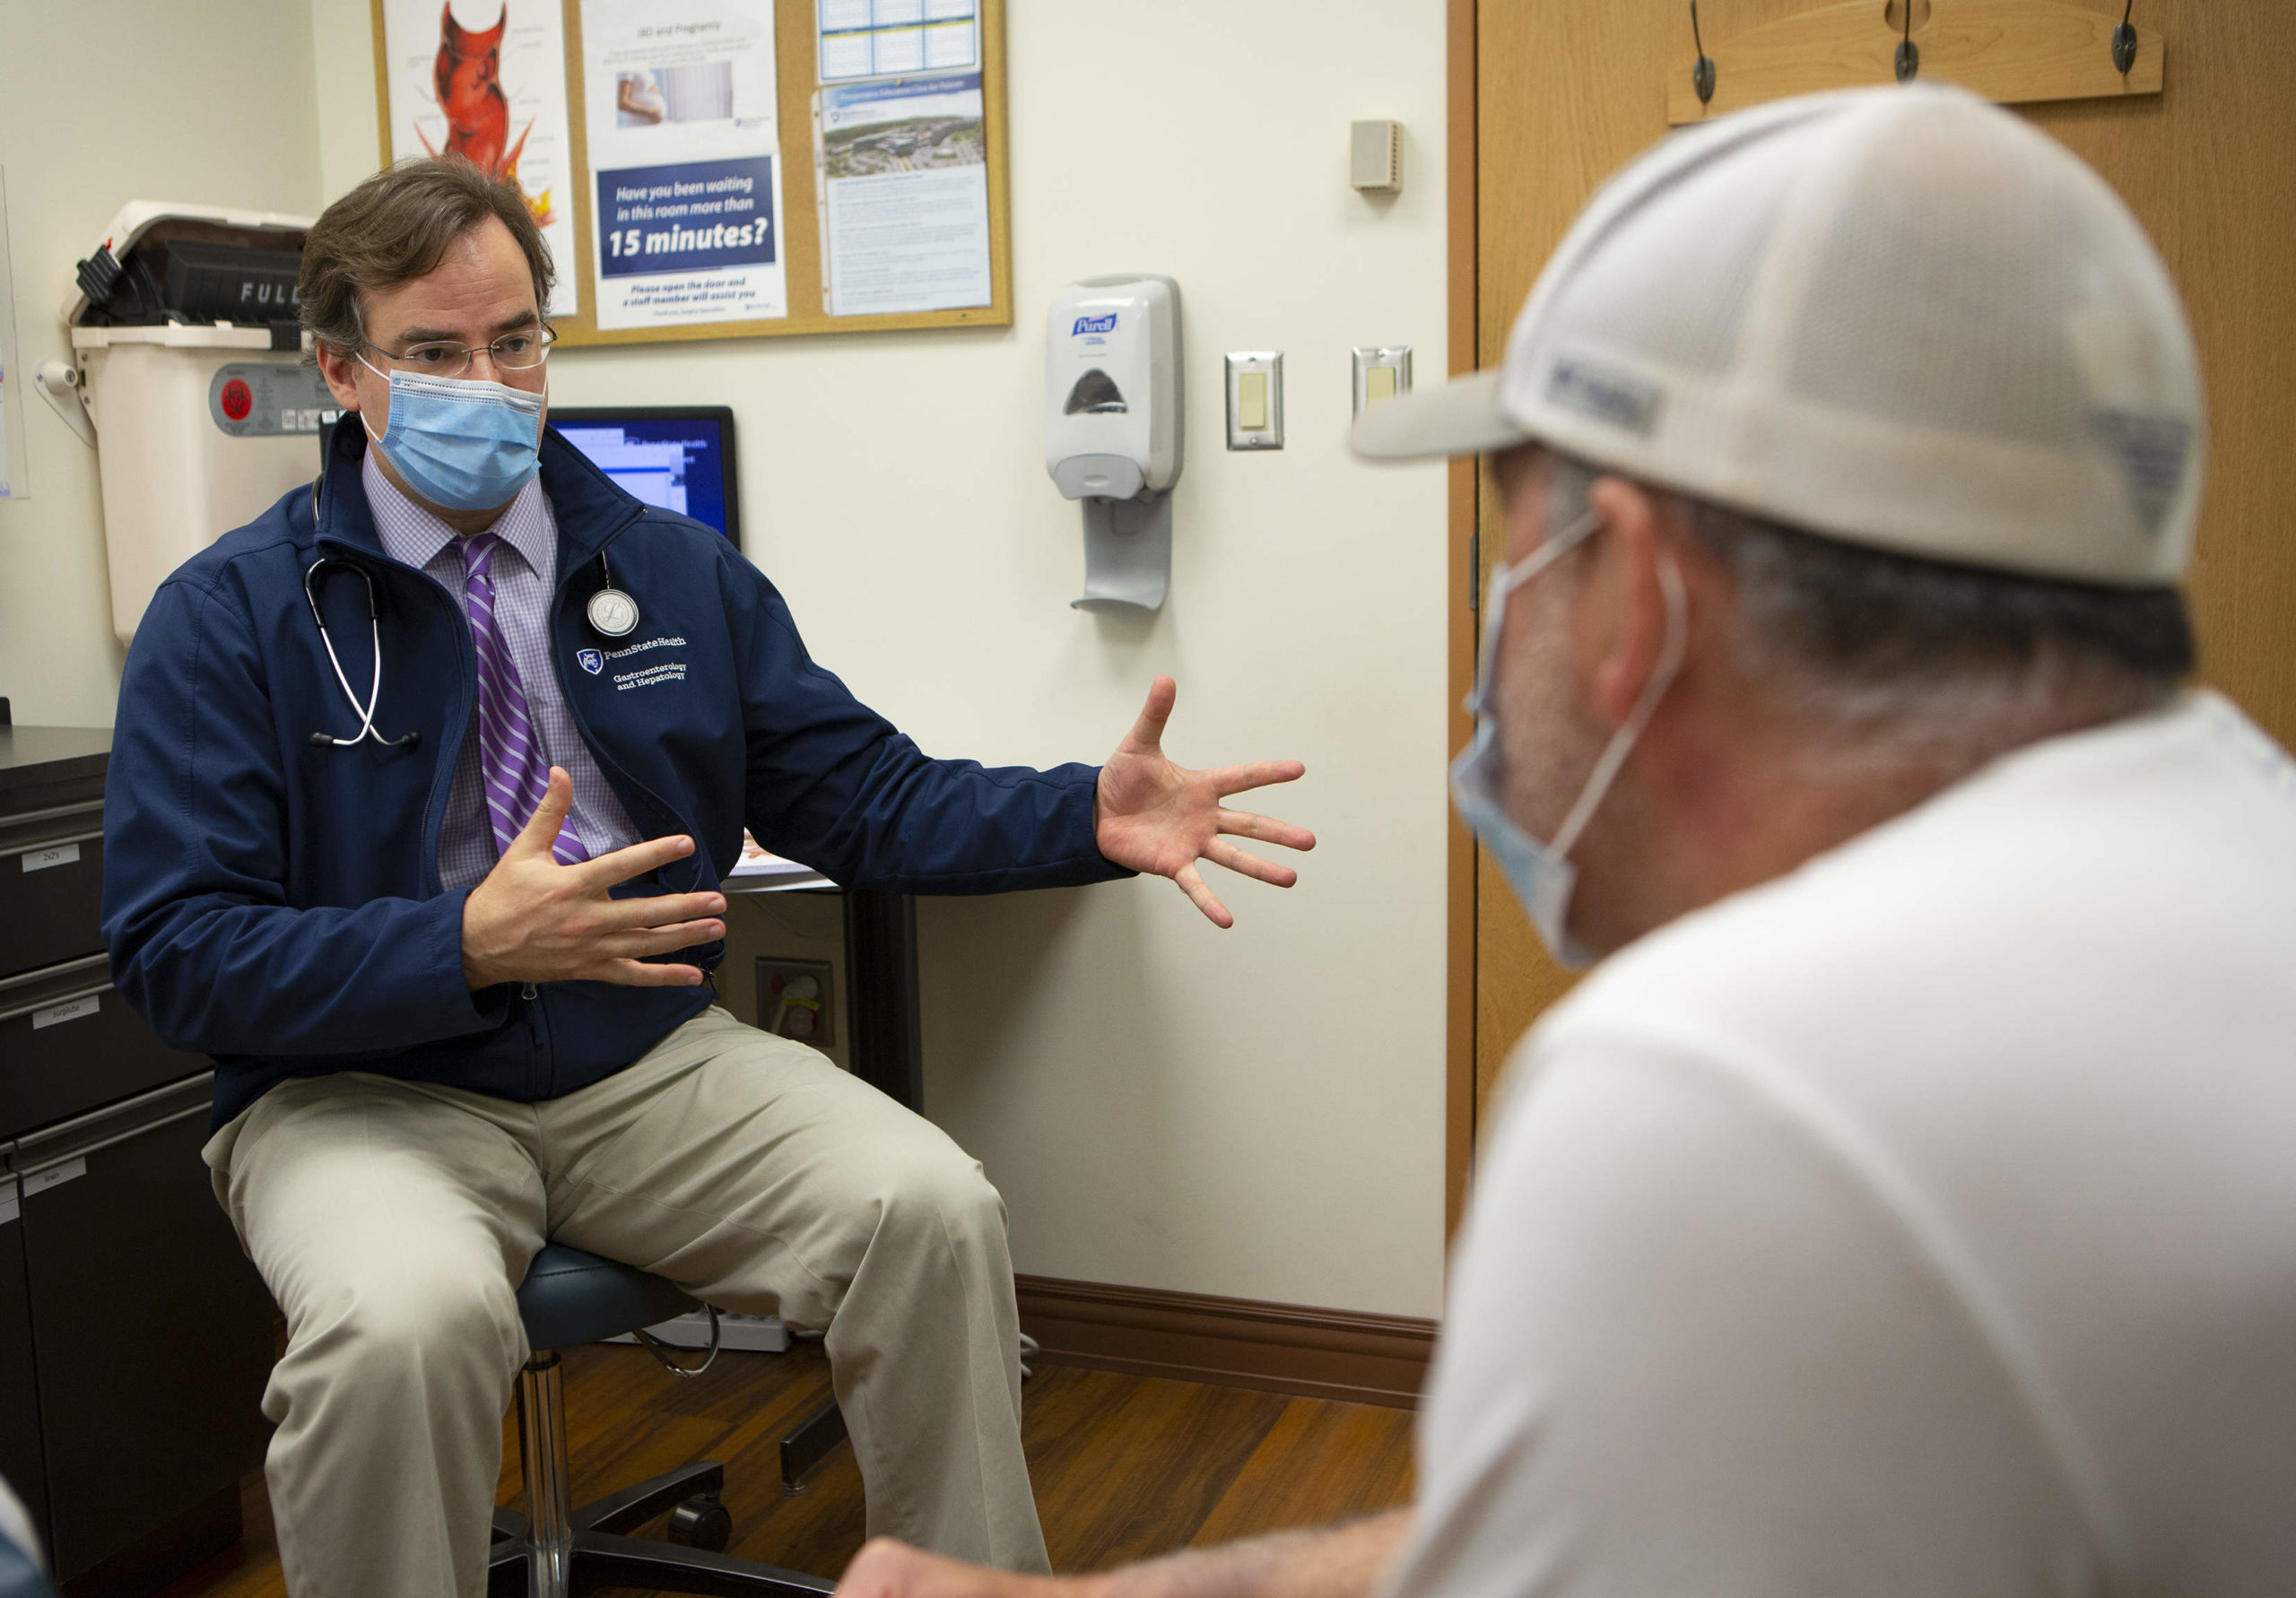 A male physician wearing a tie, Penn State Health coat, face mask and stethoscope, gestures with his hands while talking with a man seated across from him in a clinic room.